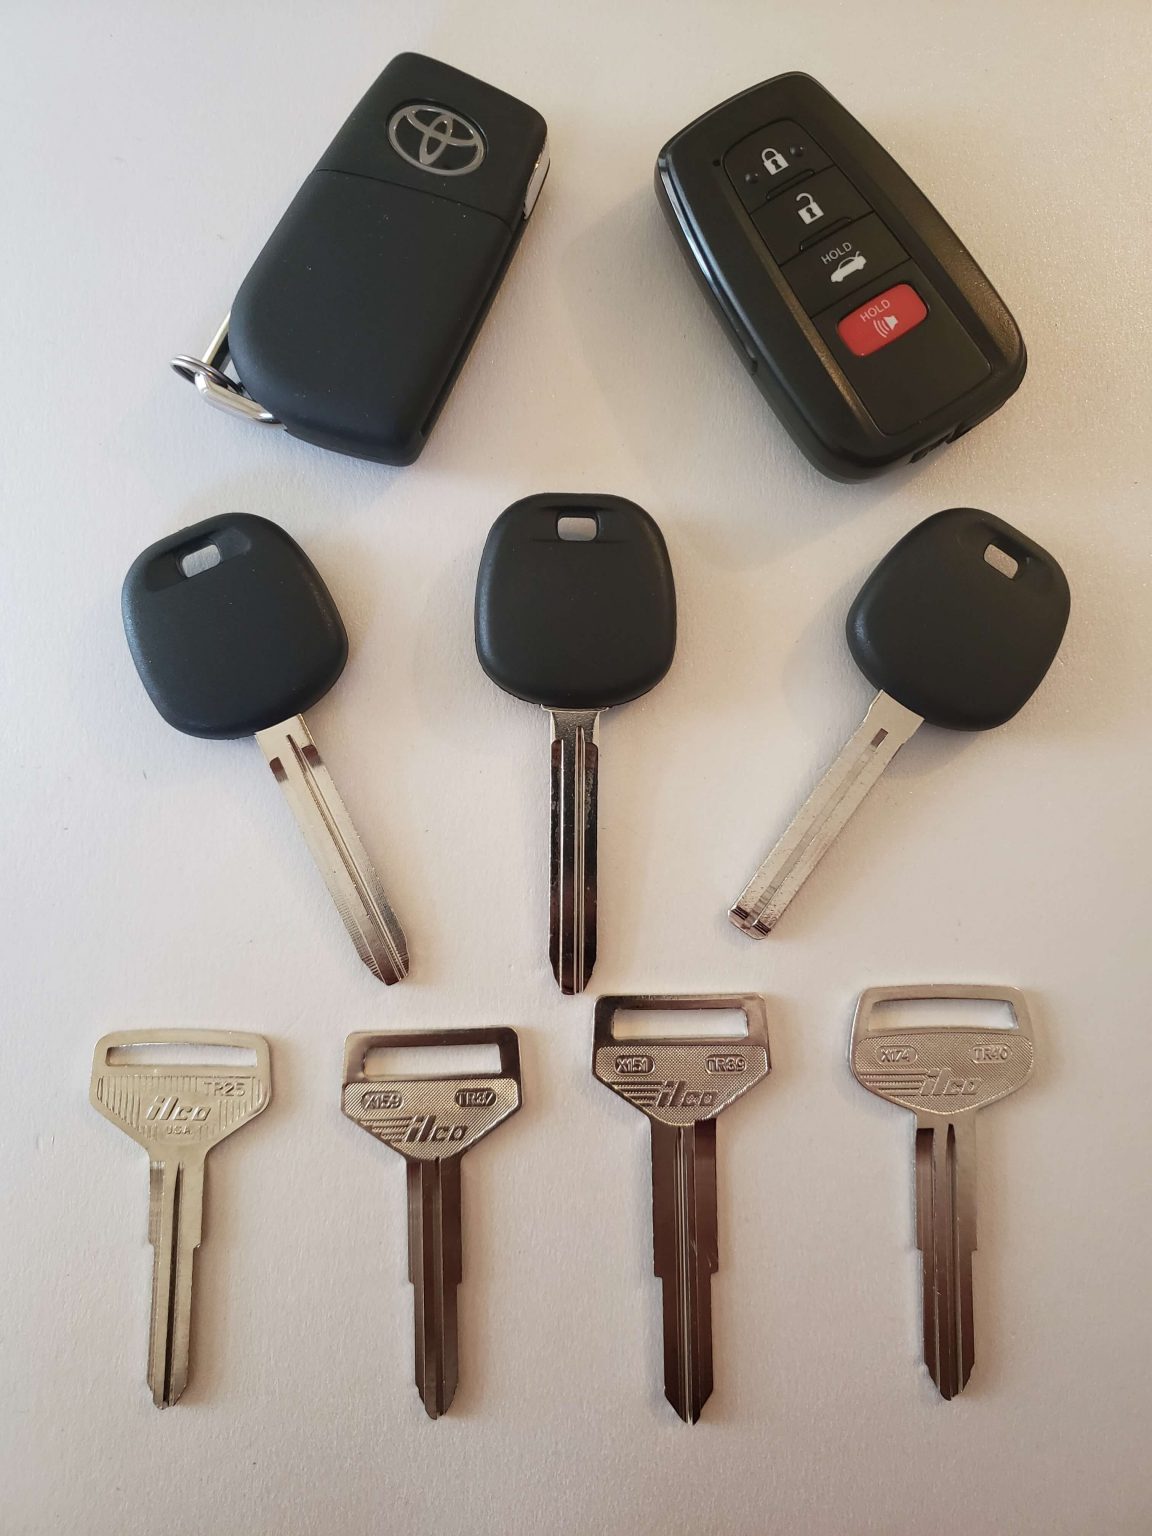 Lost Car Keys Replacement - All Car Keys Made Fast On Site 24/7